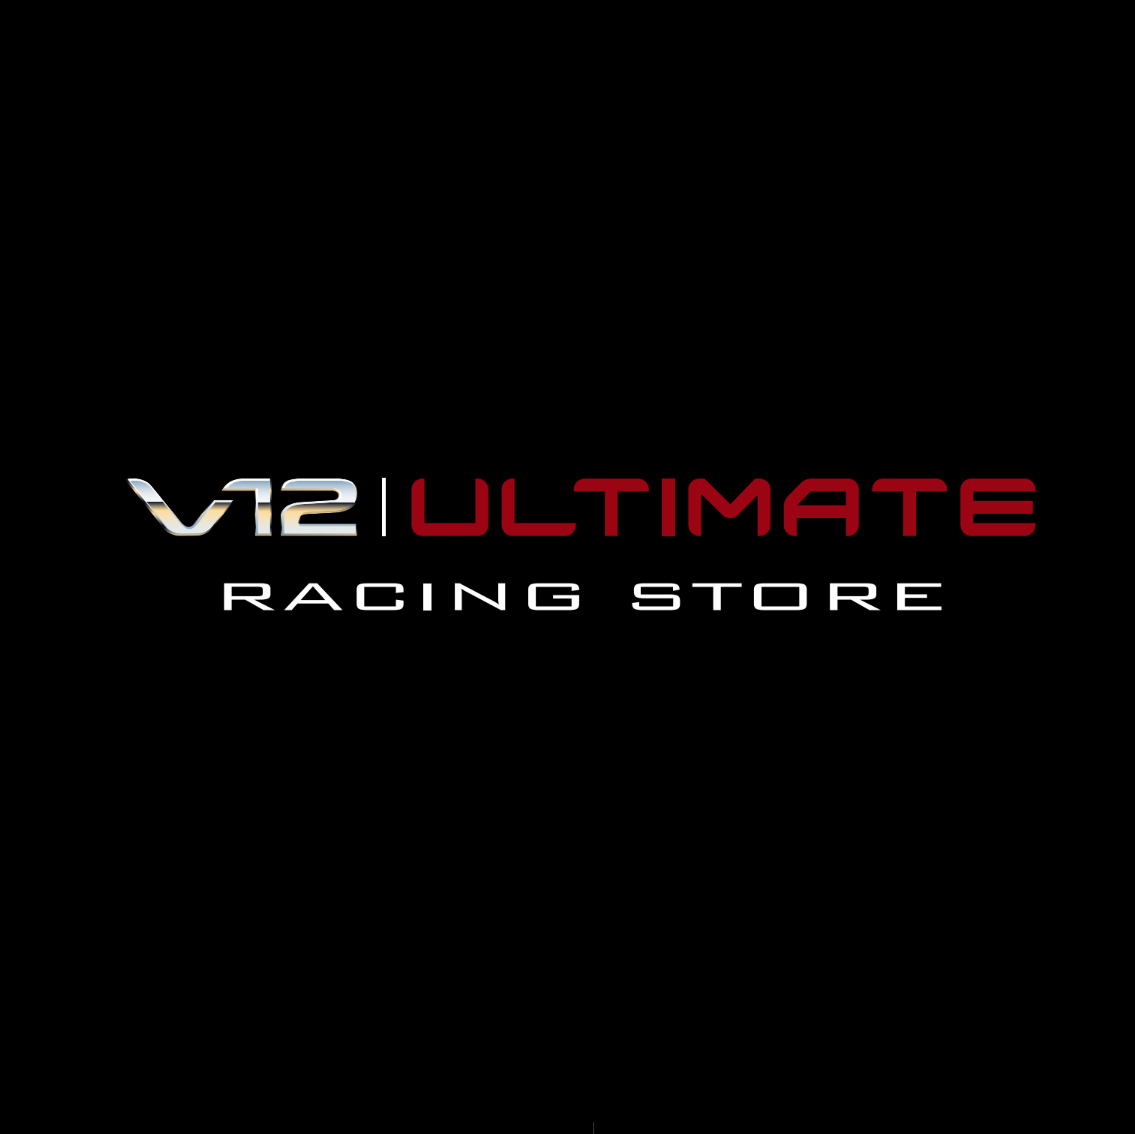 V12 Ultimate Racing Store